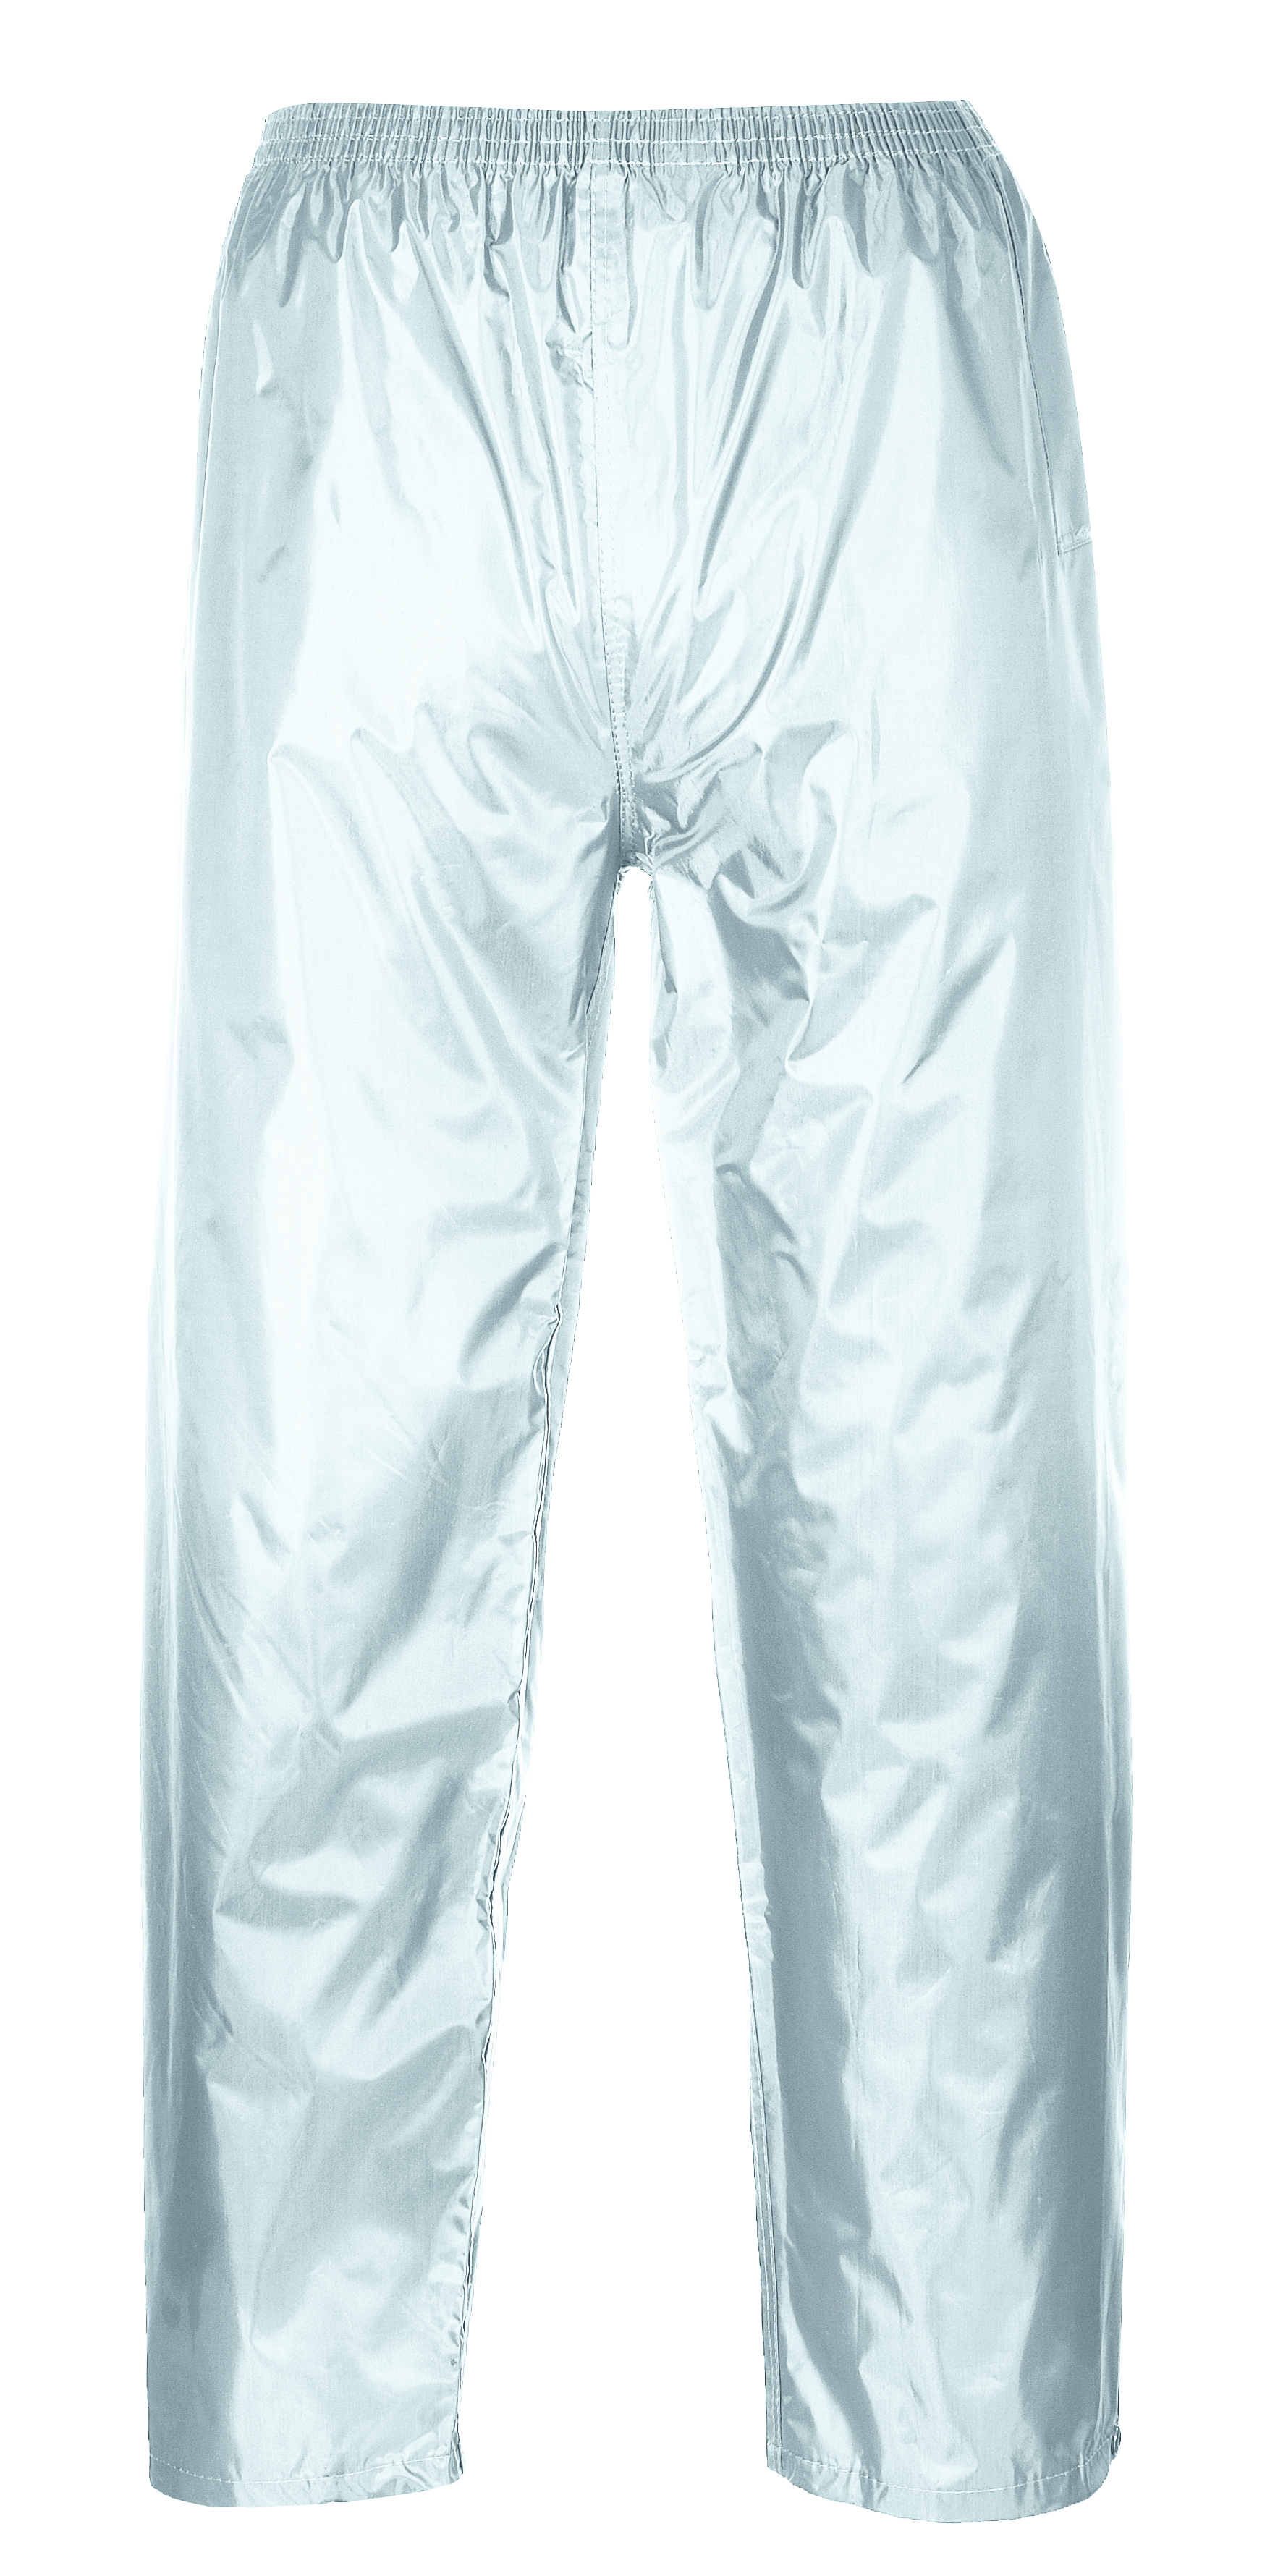 ax-httpss3.eu-west-2.amazonaws.comwebsystemstmp_for_downloadportwest-classic-adult-rain-trousers-grey.jpeg